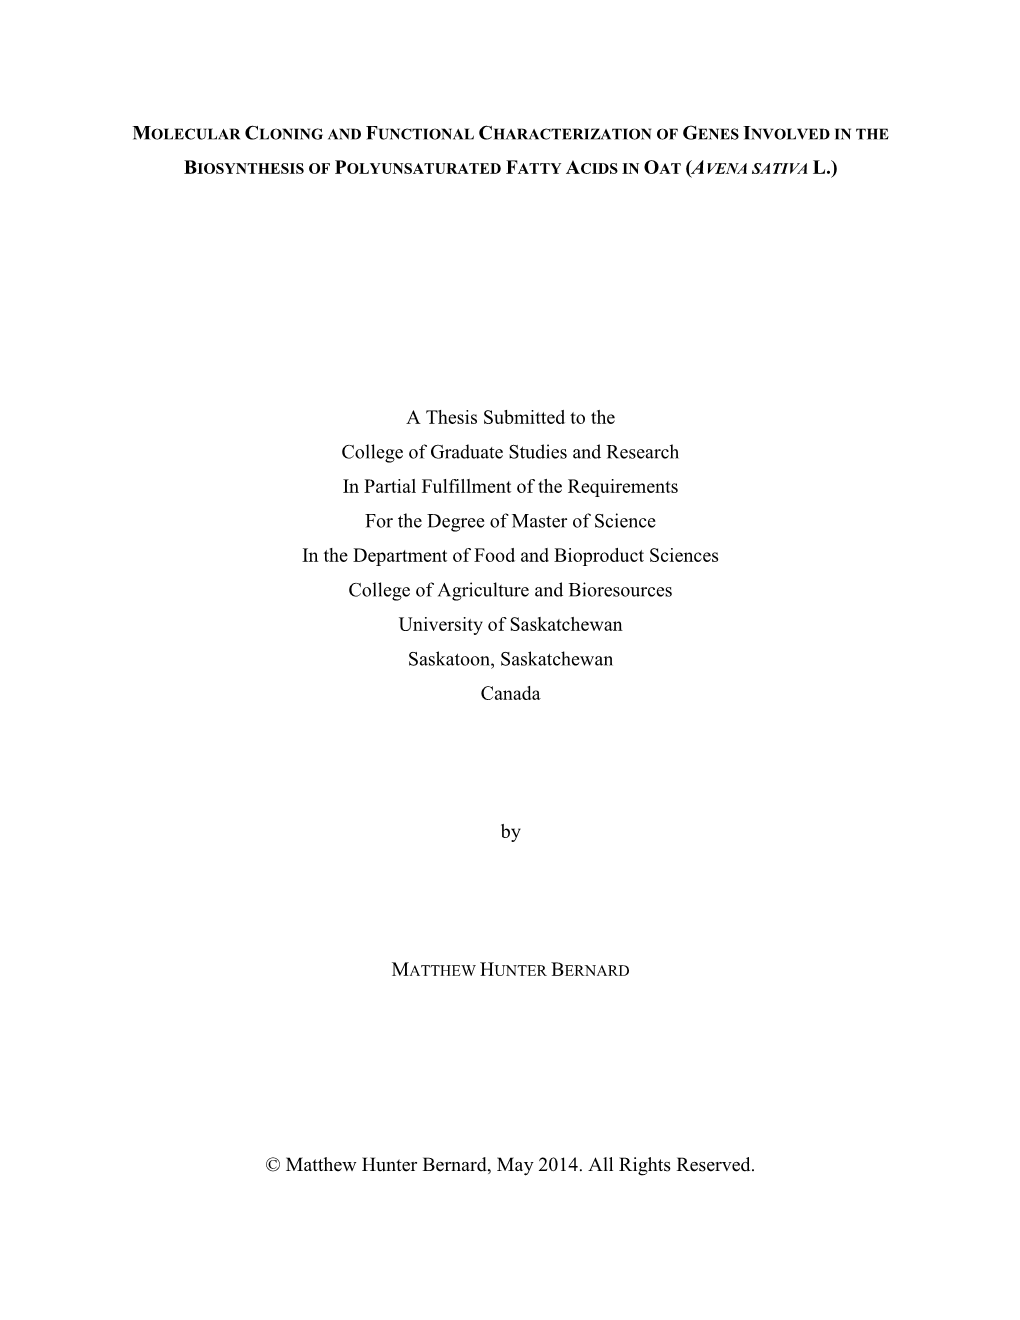 A Thesis Submitted to the College of Graduate Studies and Research In